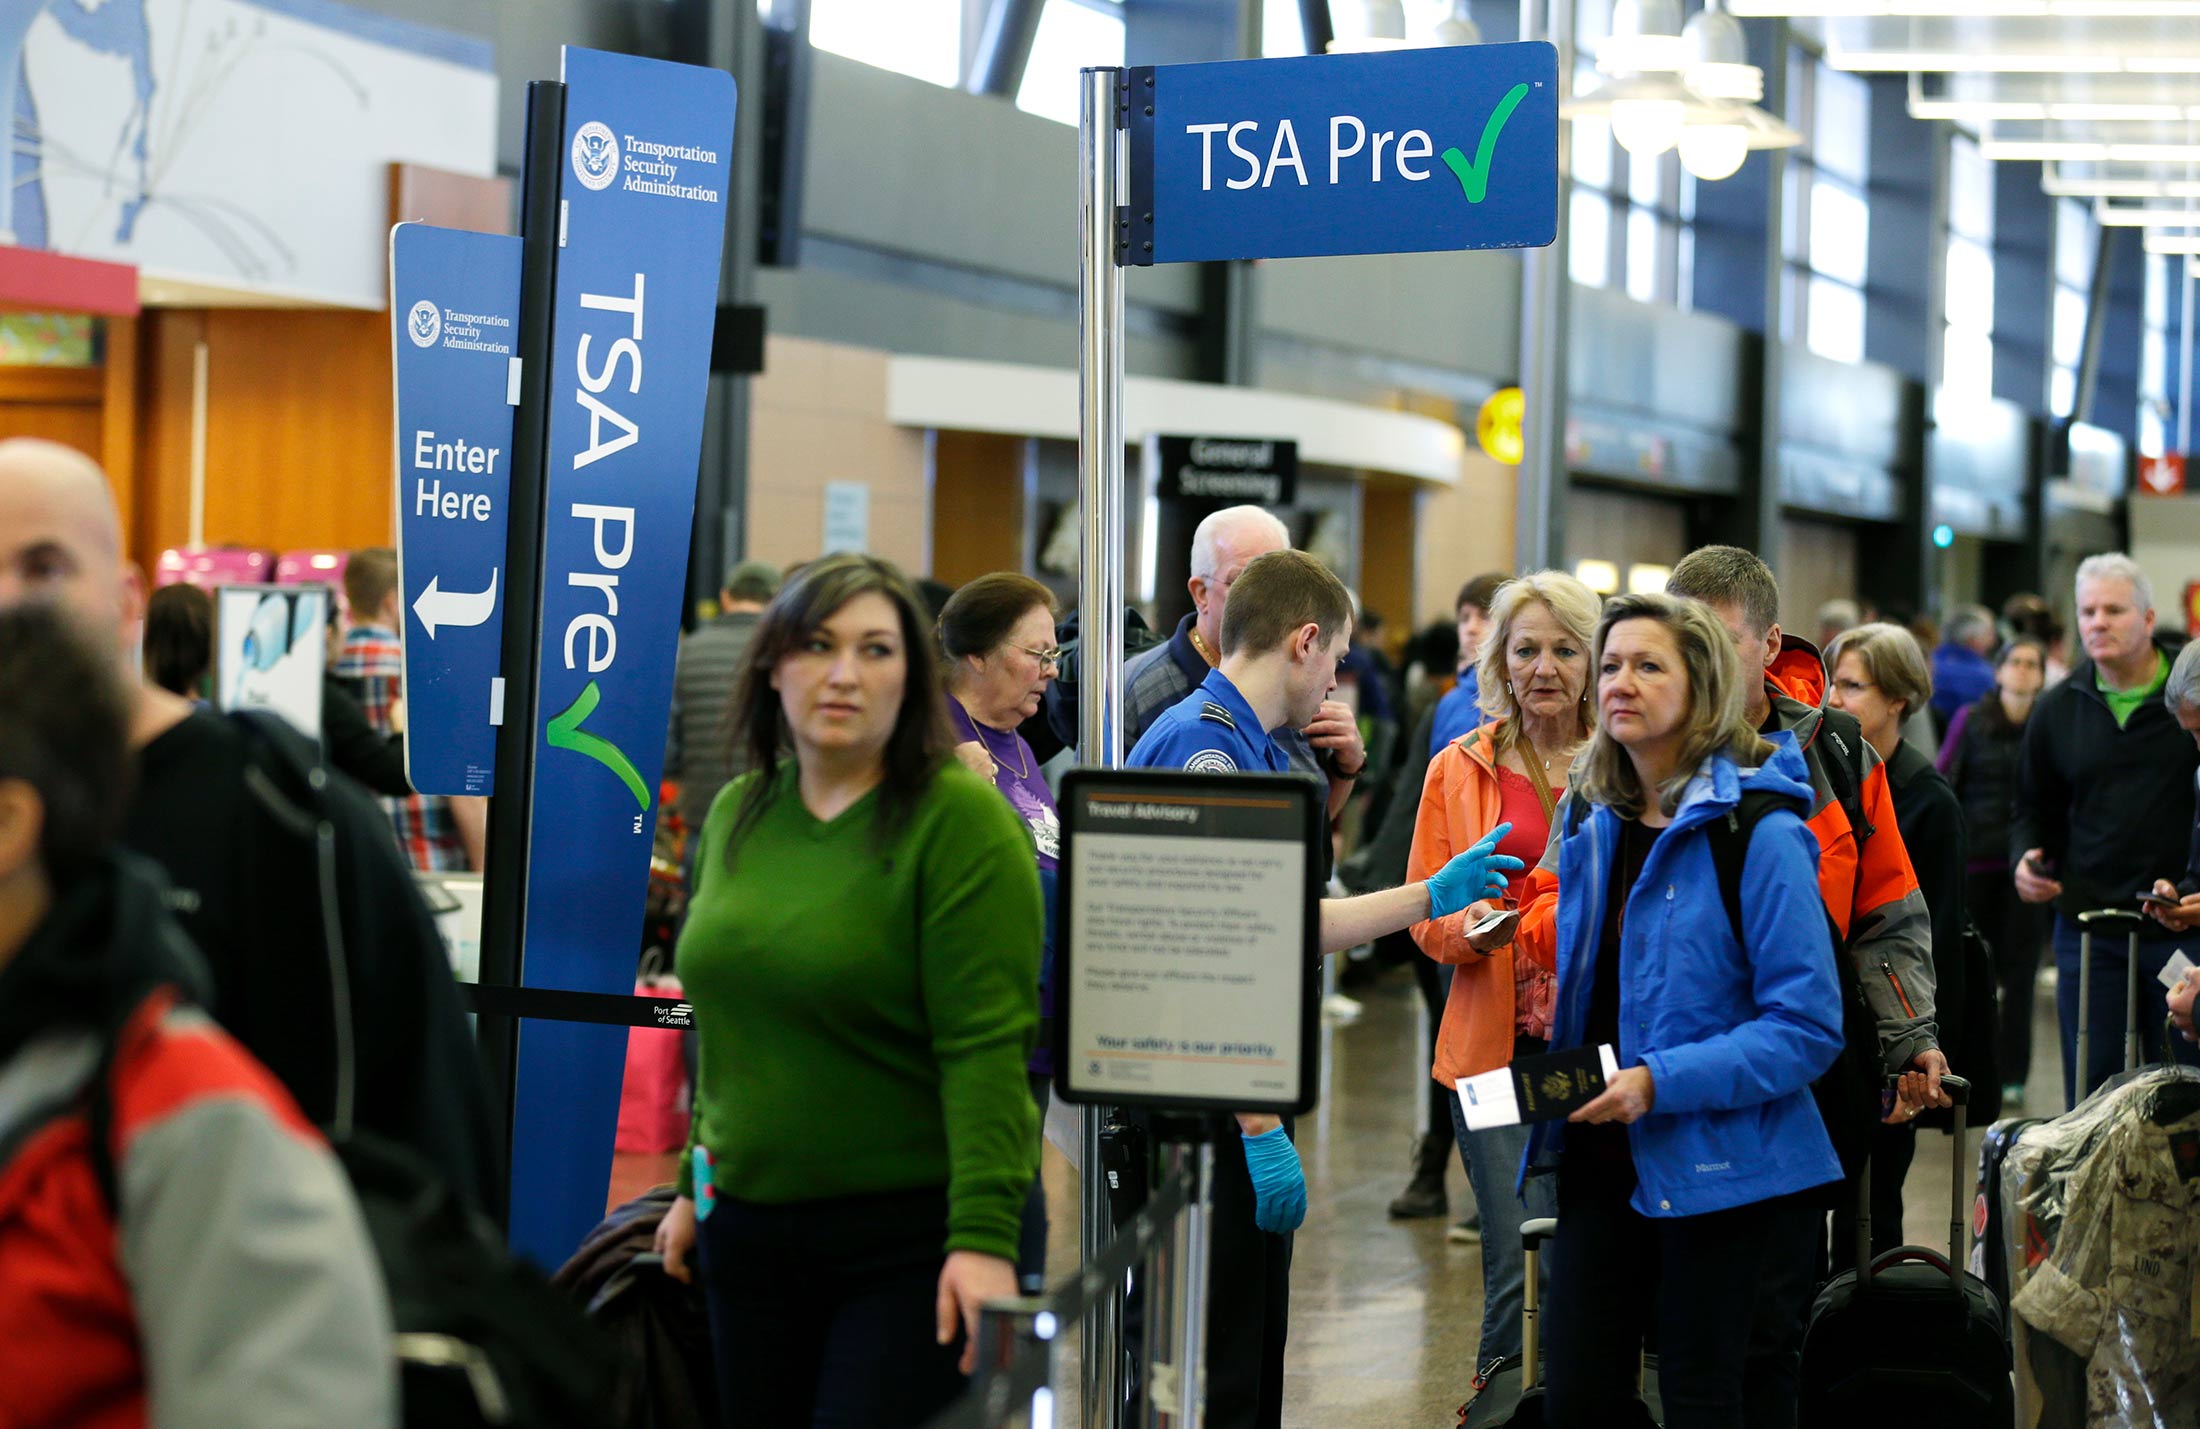 tsa-precheck-is-stuck-in-its-own-security-line-bloomberg